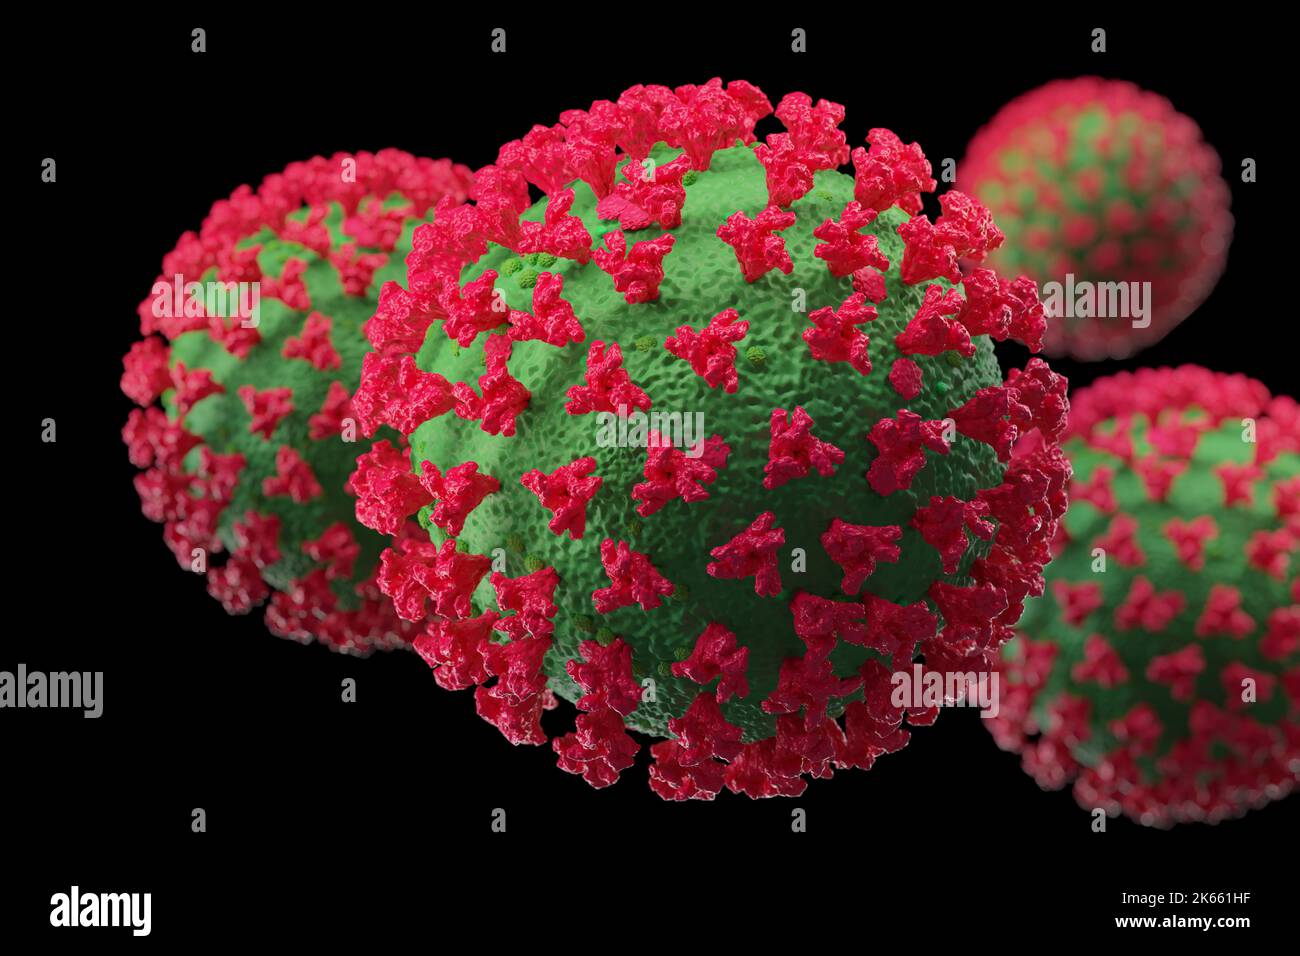 COVID variant coronavirus medical illustration 3d rendering. BQ.1.1 highly mutated subvariant, very contagious Stock Photo